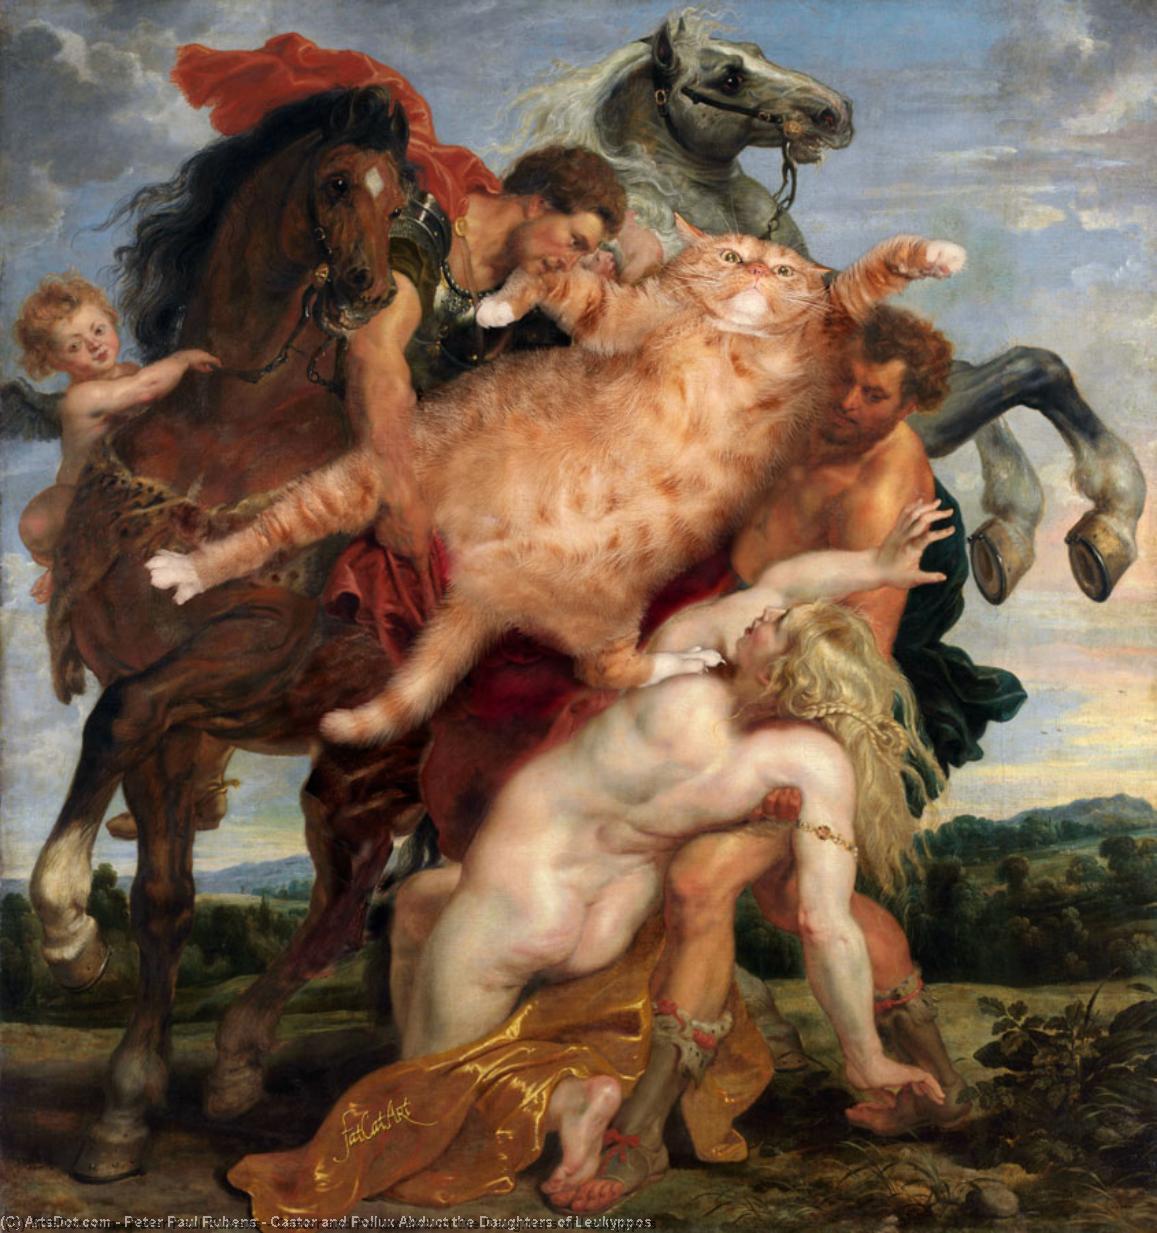 WikiOO.org - Encyclopedia of Fine Arts - Festés, Grafika Peter Paul Rubens - Castor and Pollux Abduct the Daughters of Leukyppos